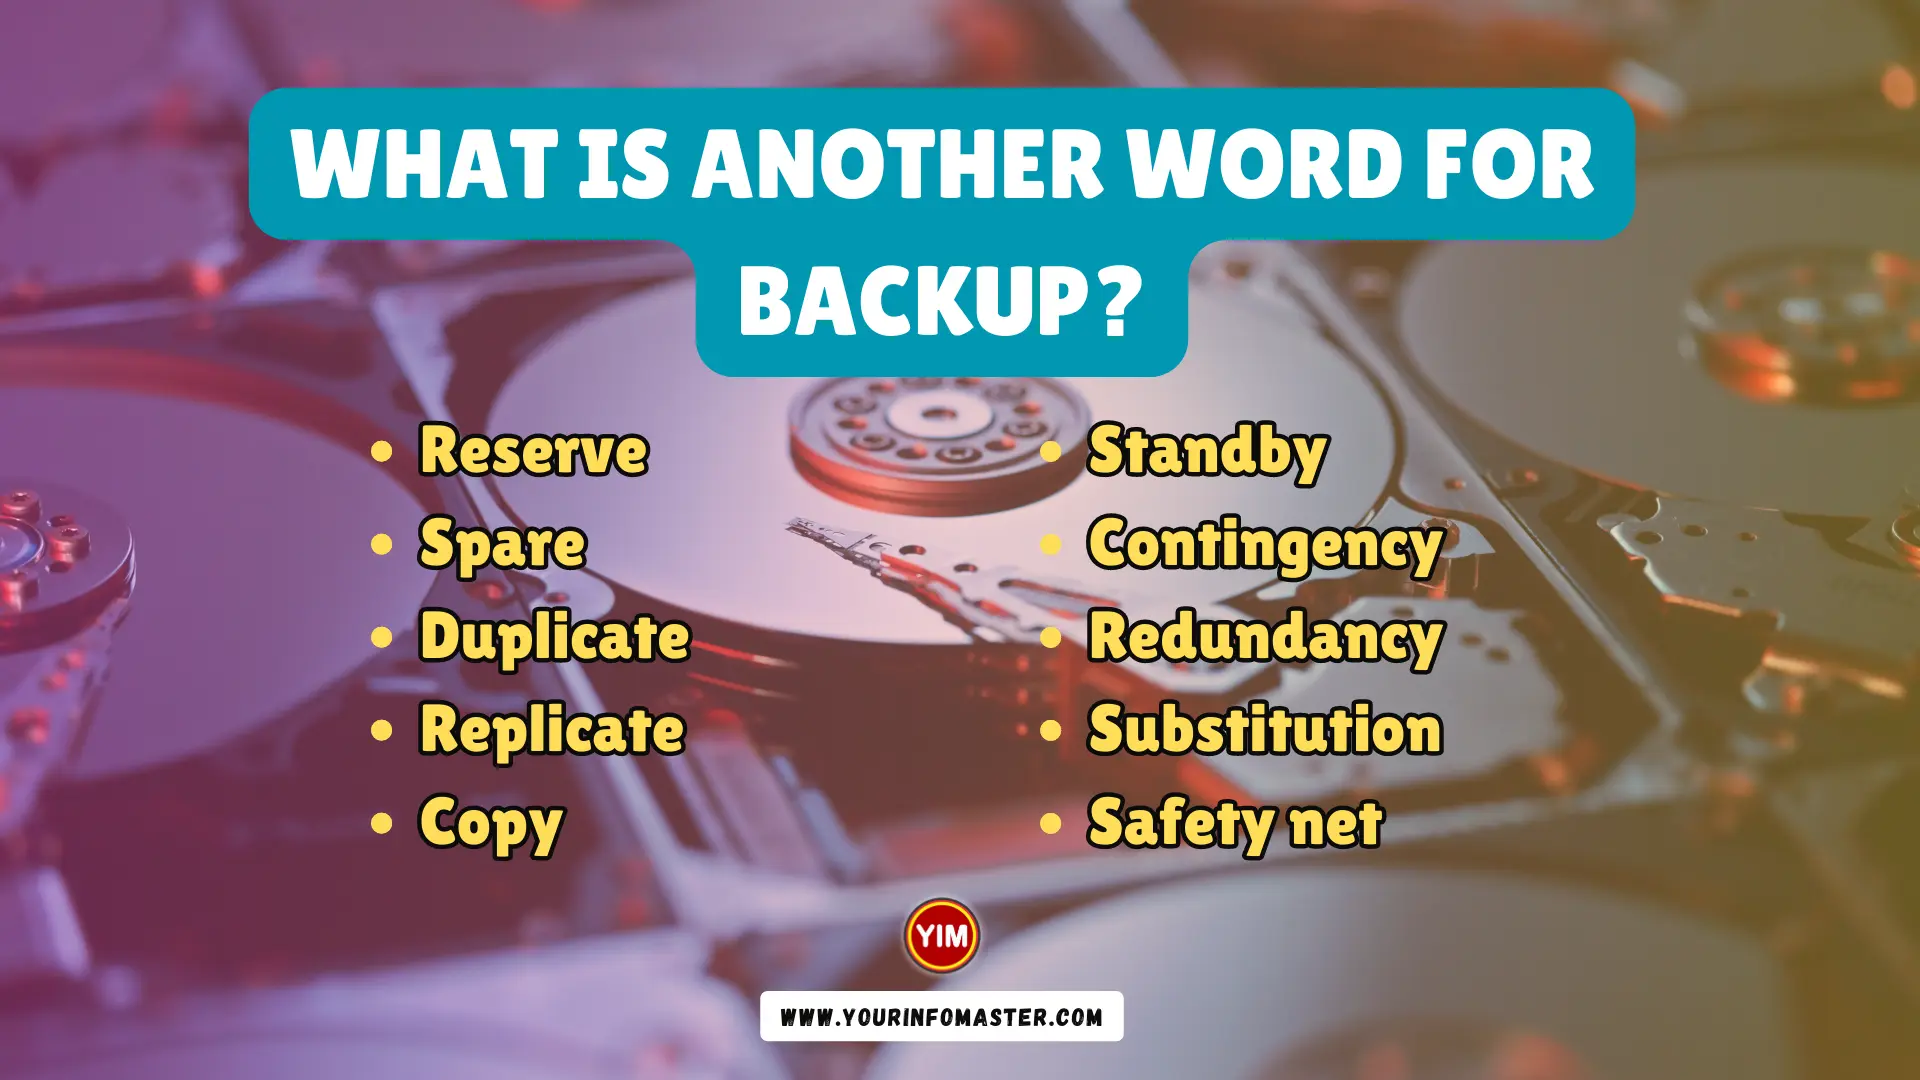 What is another word for Backup